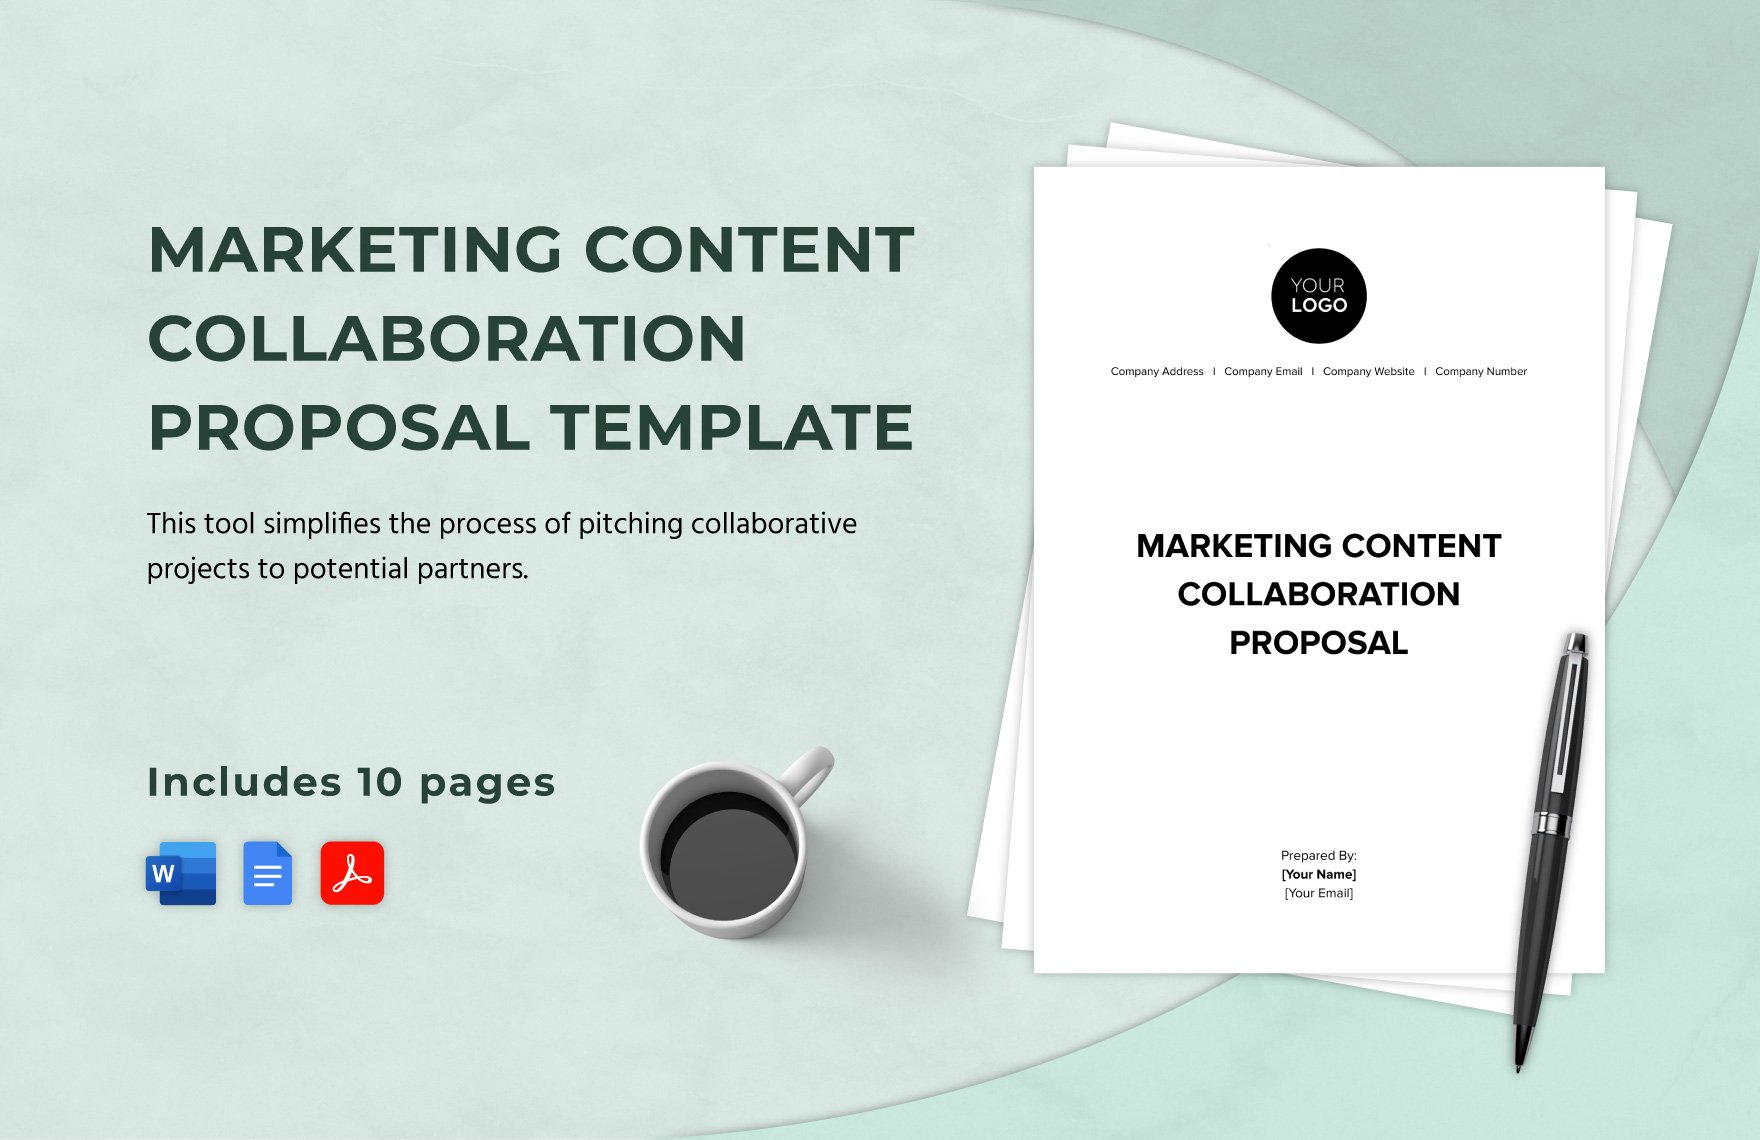 Marketing Content Collaboration Proposal Template in Word, Google Docs, PDF